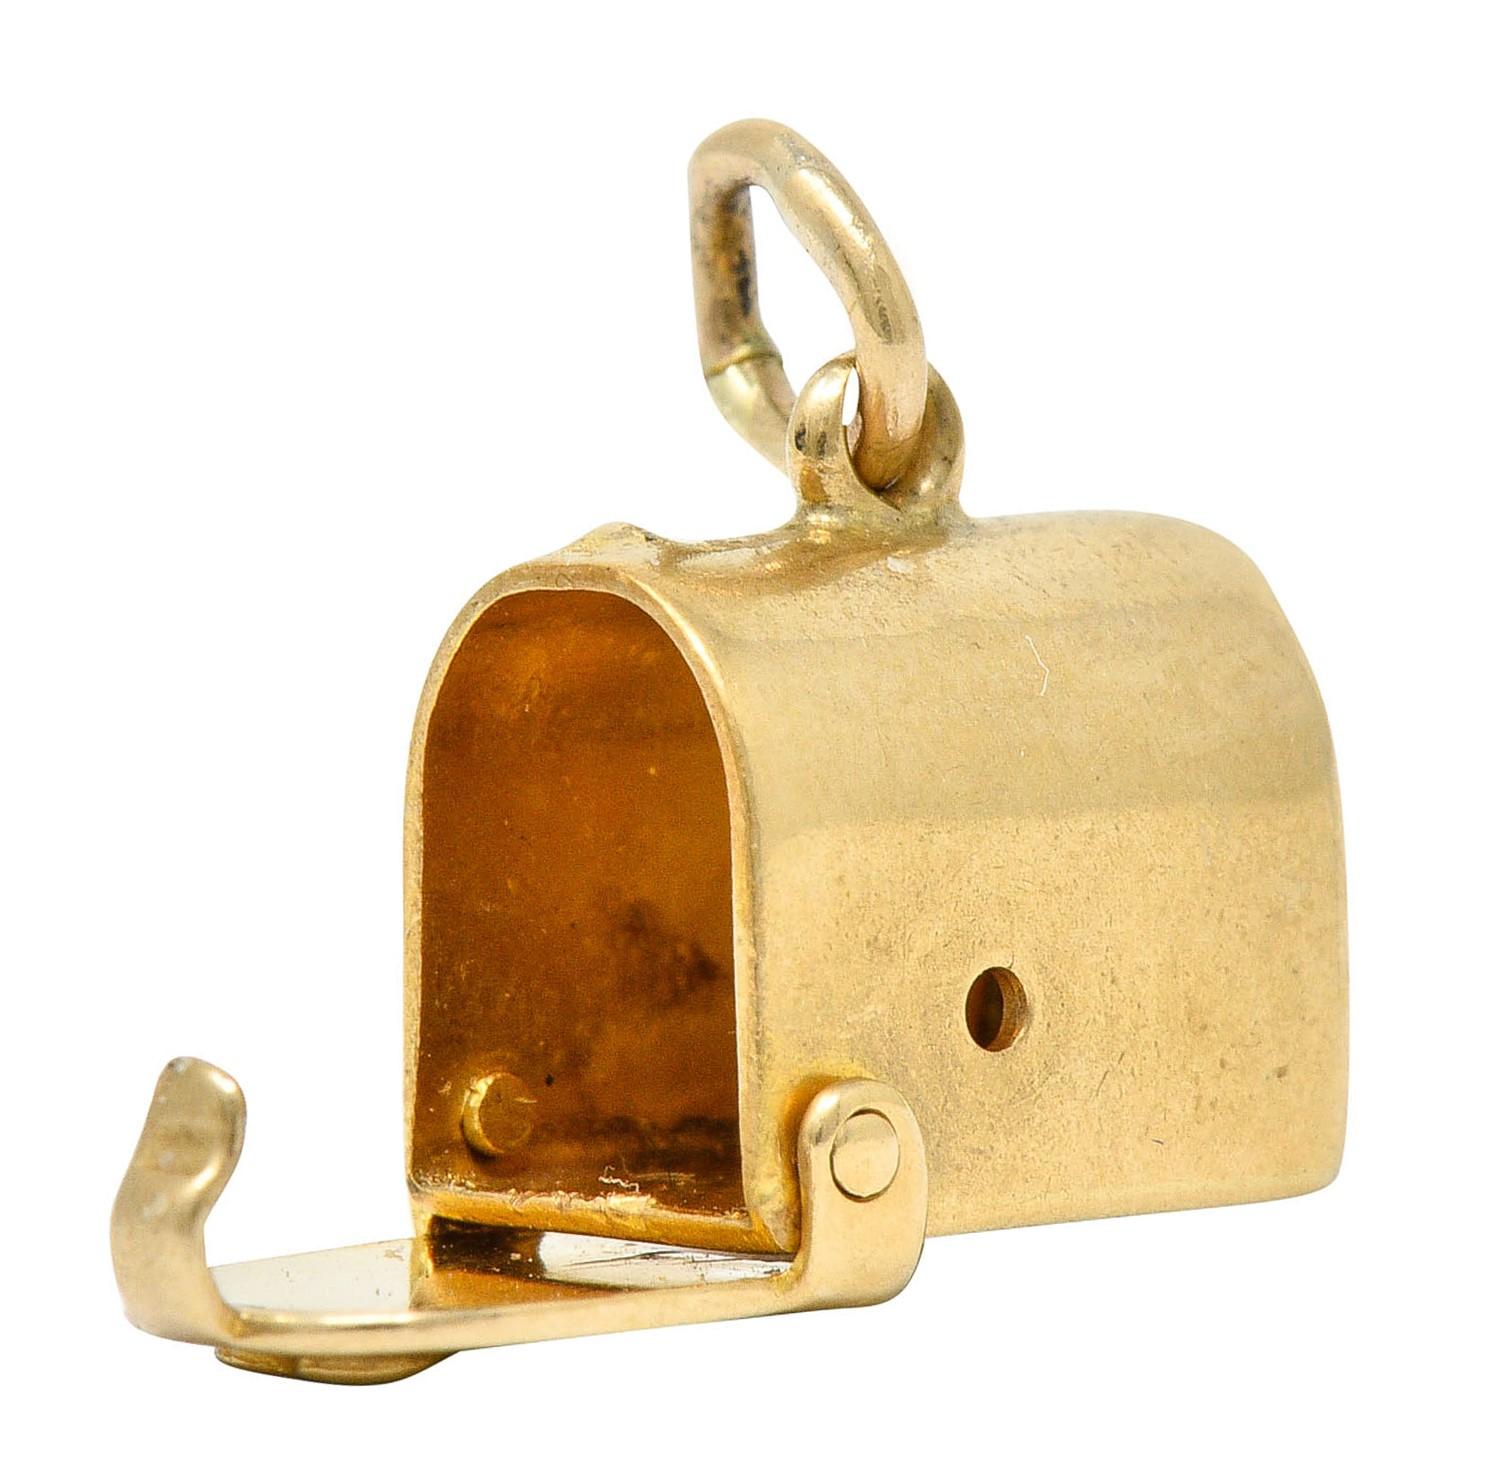 Designed as a planished mailbox form

With a front facing heart on its door

Which opens on a hinge

Completed by a jump ring bale

Stamped 14K for 14 karat gold

Circa: 1940s

Measures: 1/4 x 3/8 inch

Total weight: 1.4 grams

Deliverable.